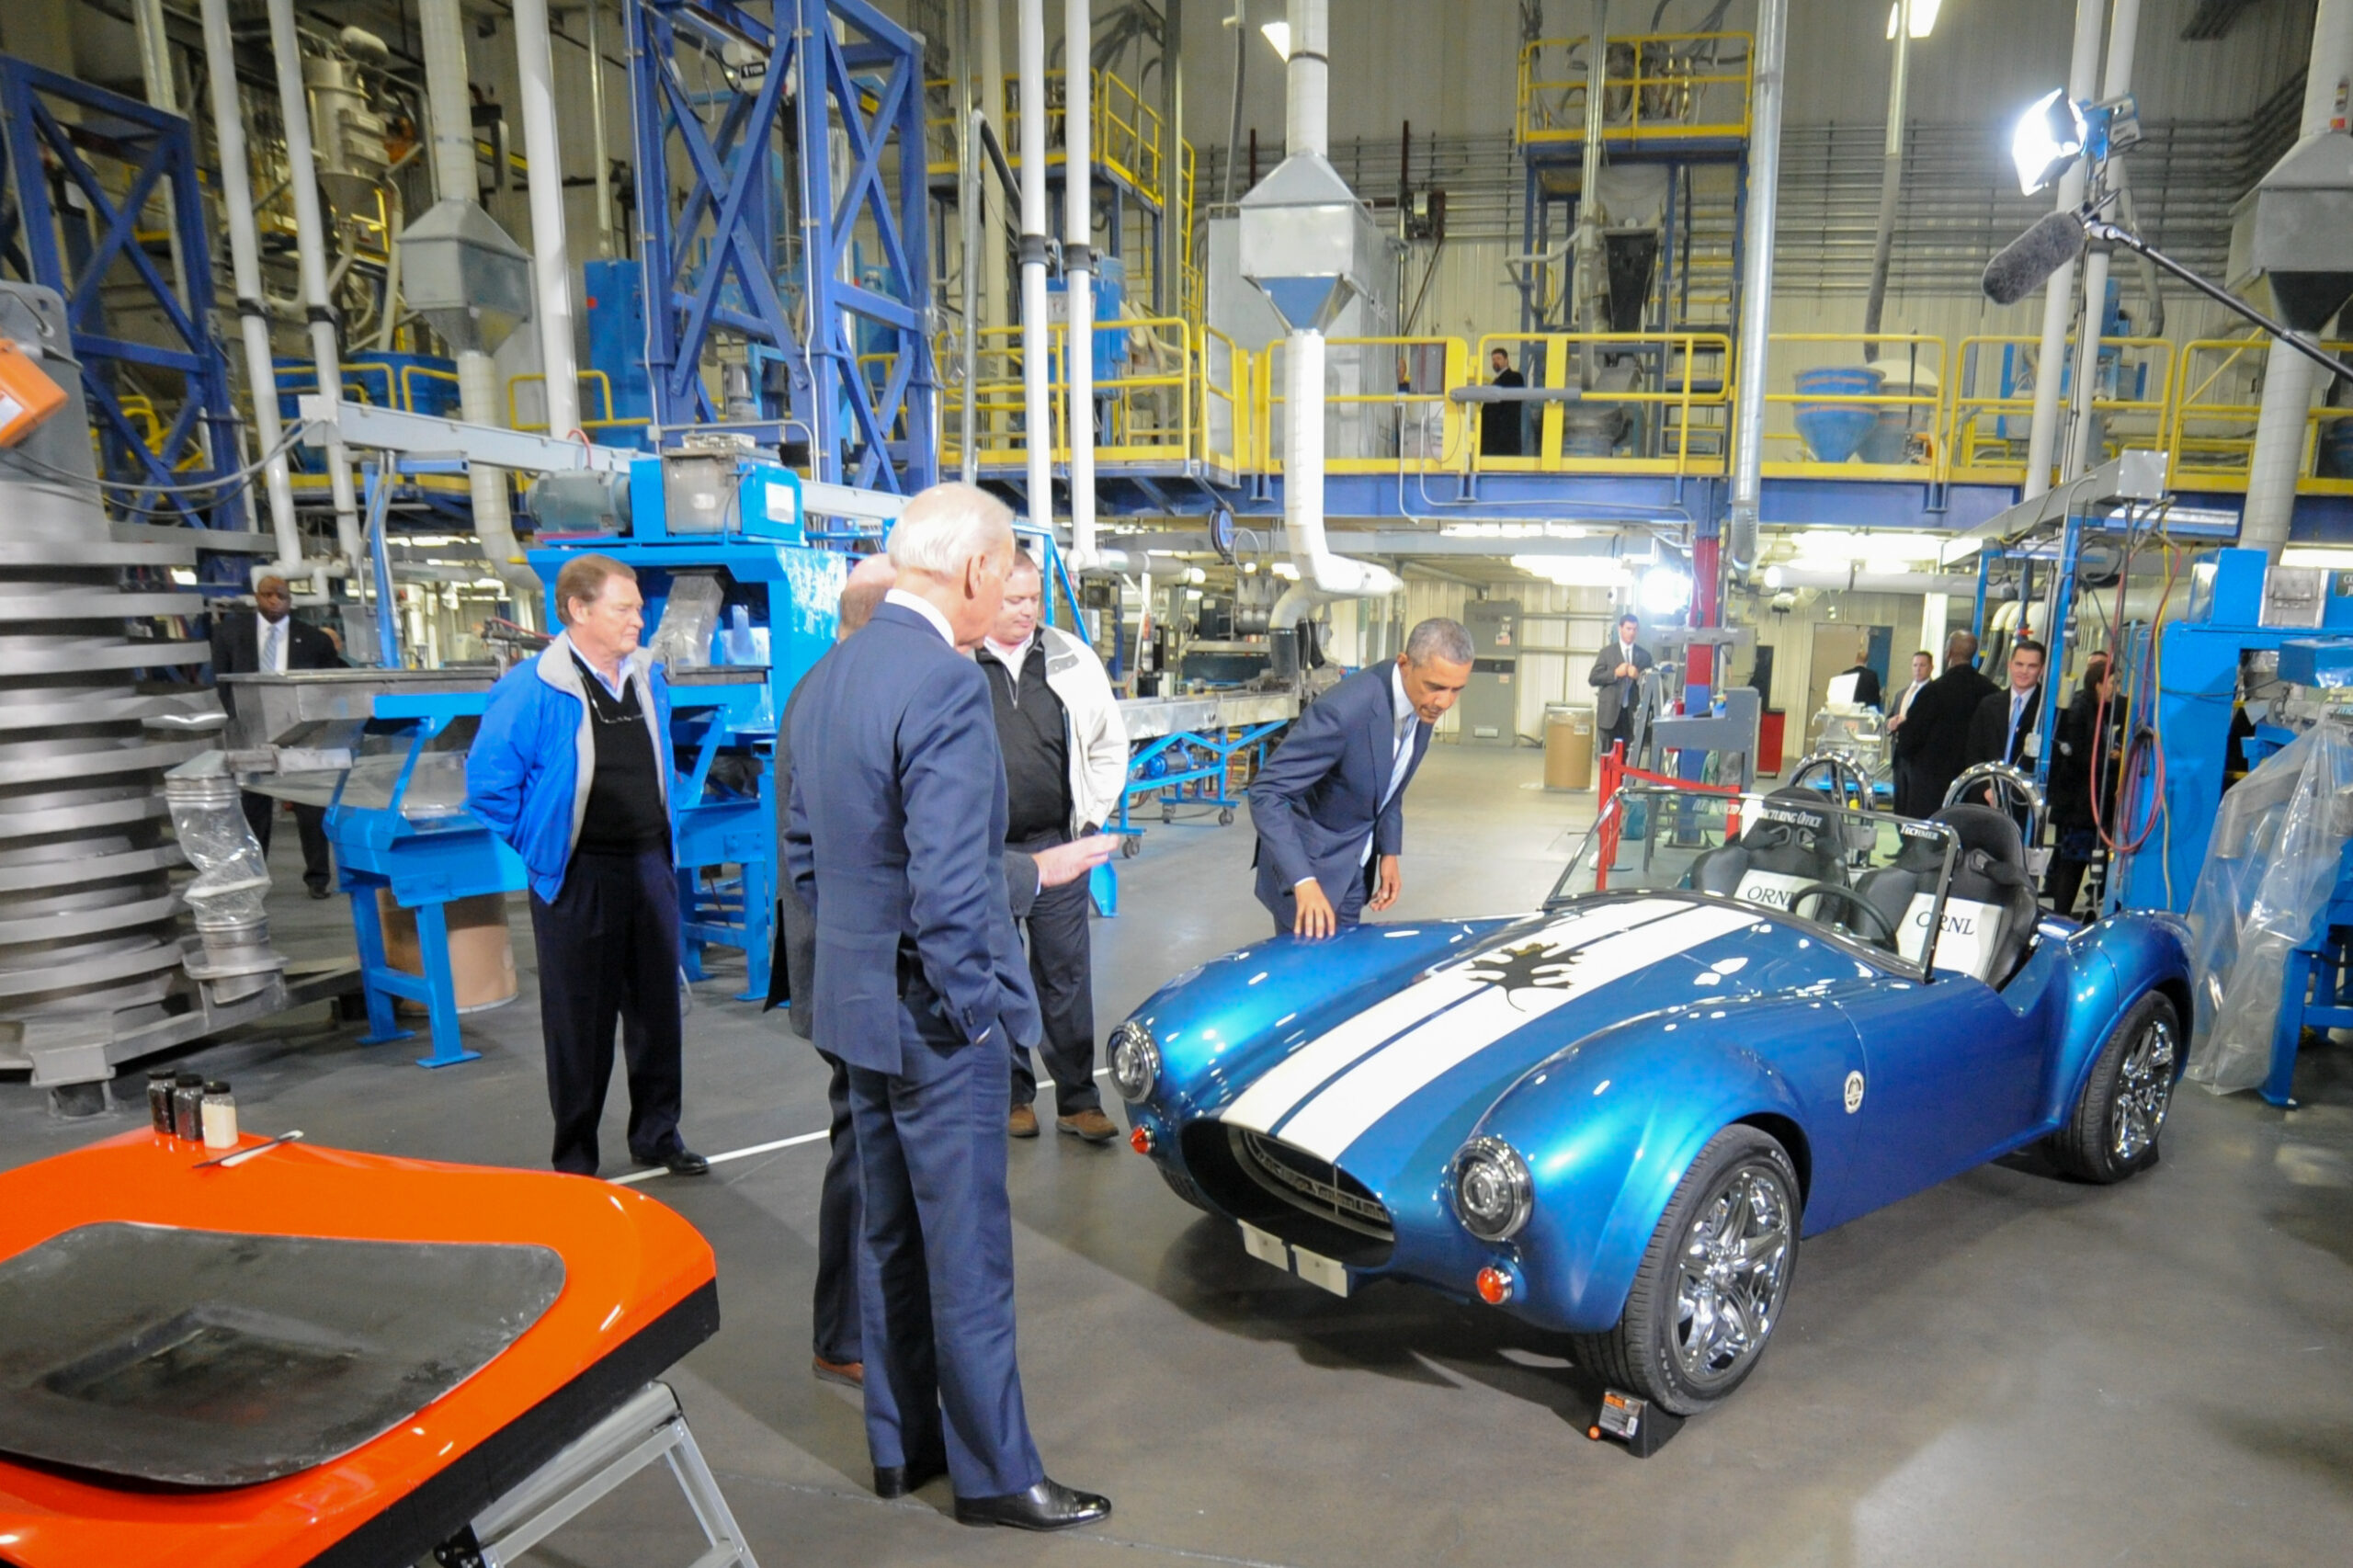 President, Vice President of the United States Visit Techmer PM, Announce Manufacturing Innovation Hub